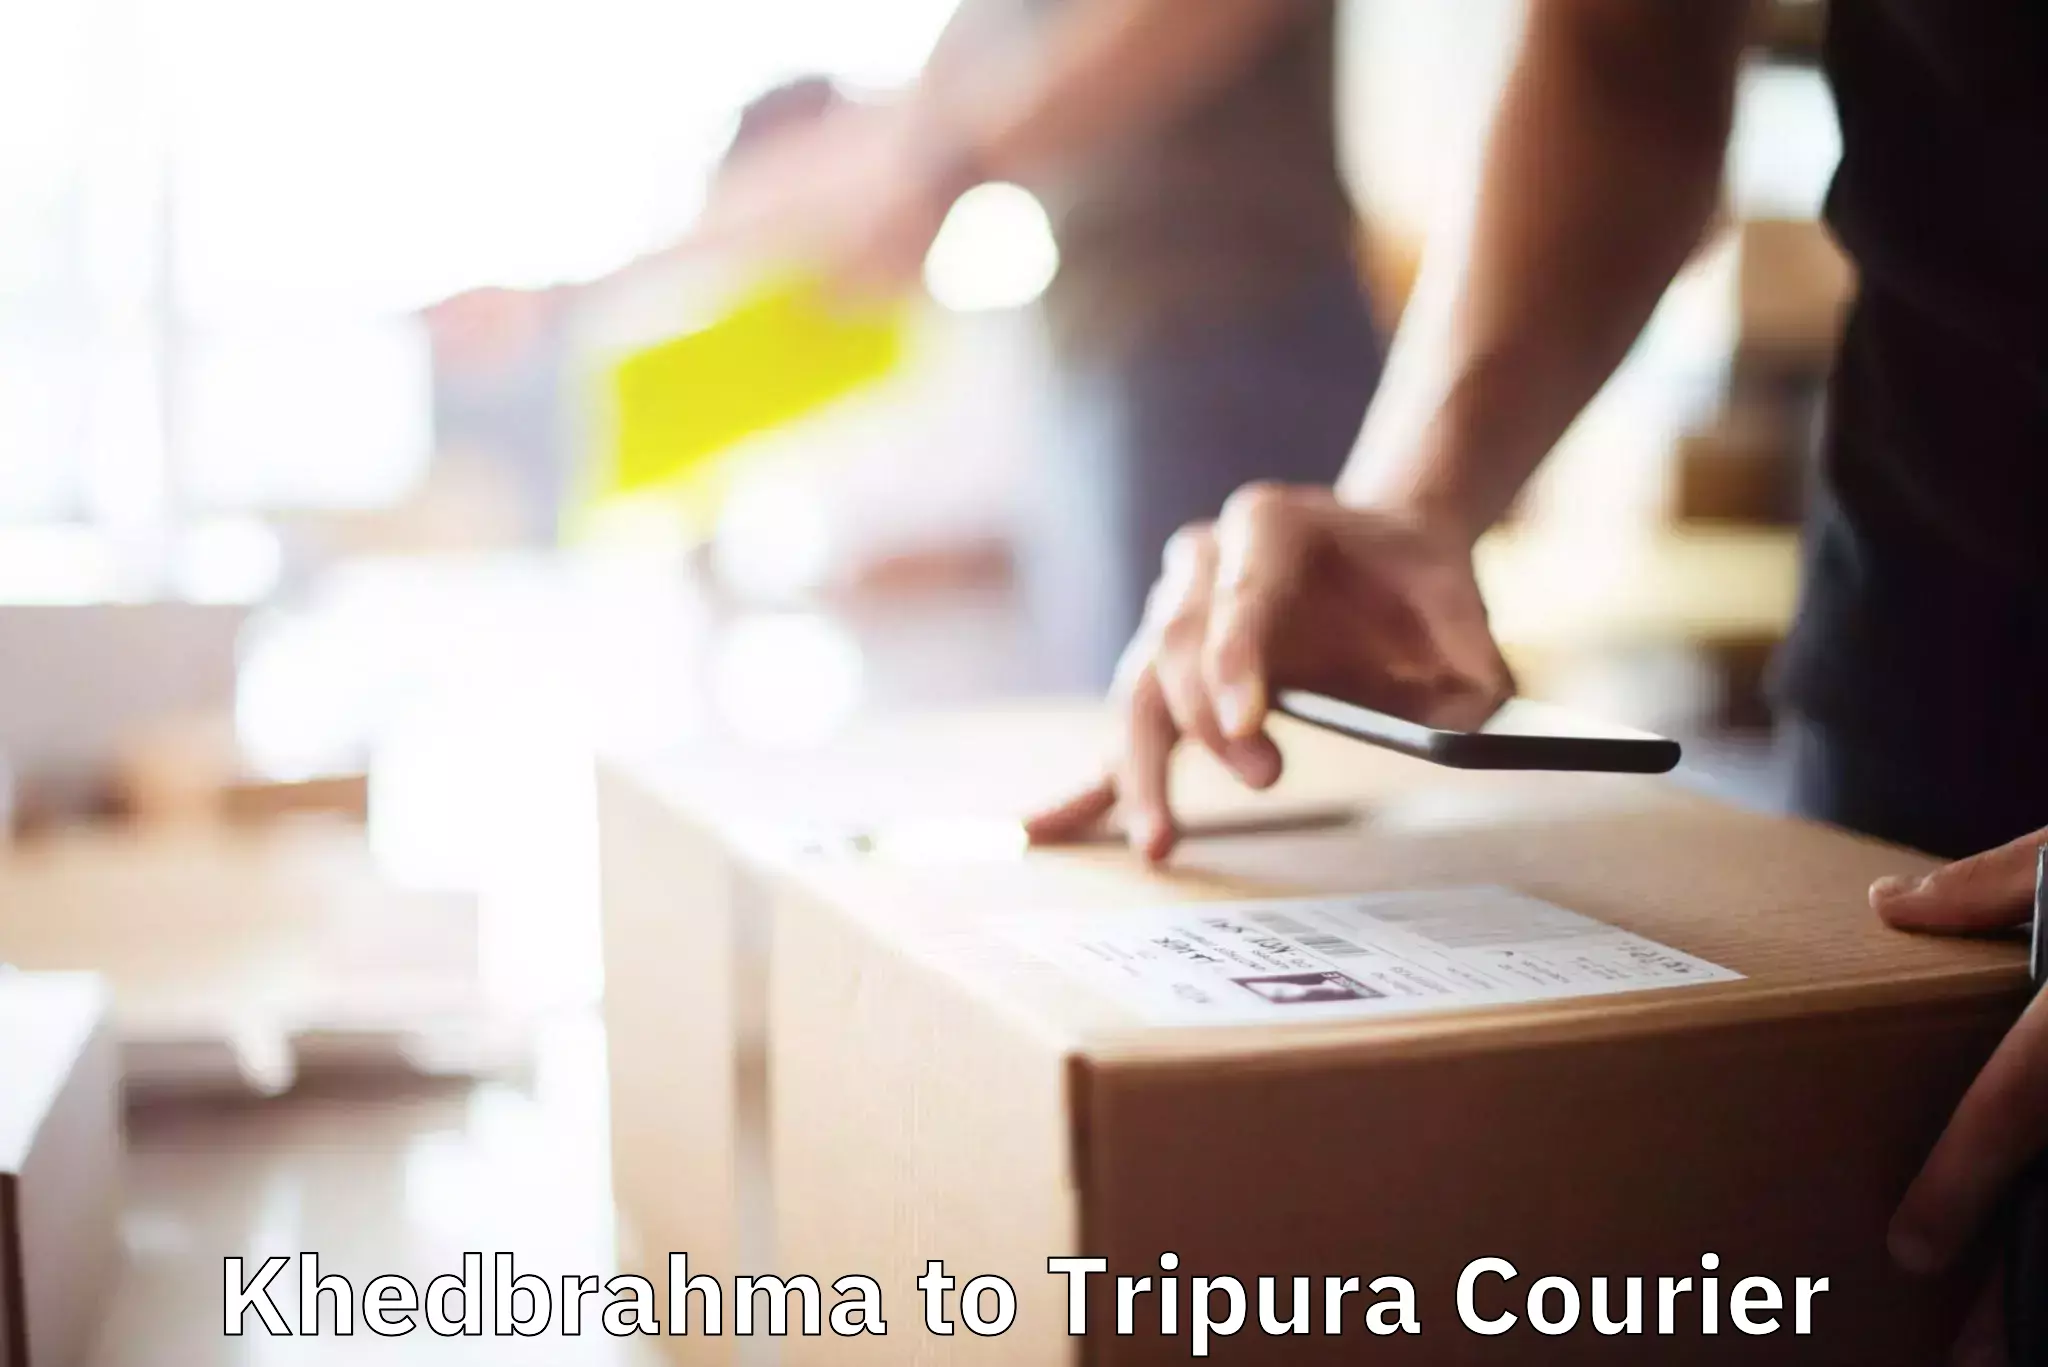 Professional movers and packers in Khedbrahma to Udaipur Tripura